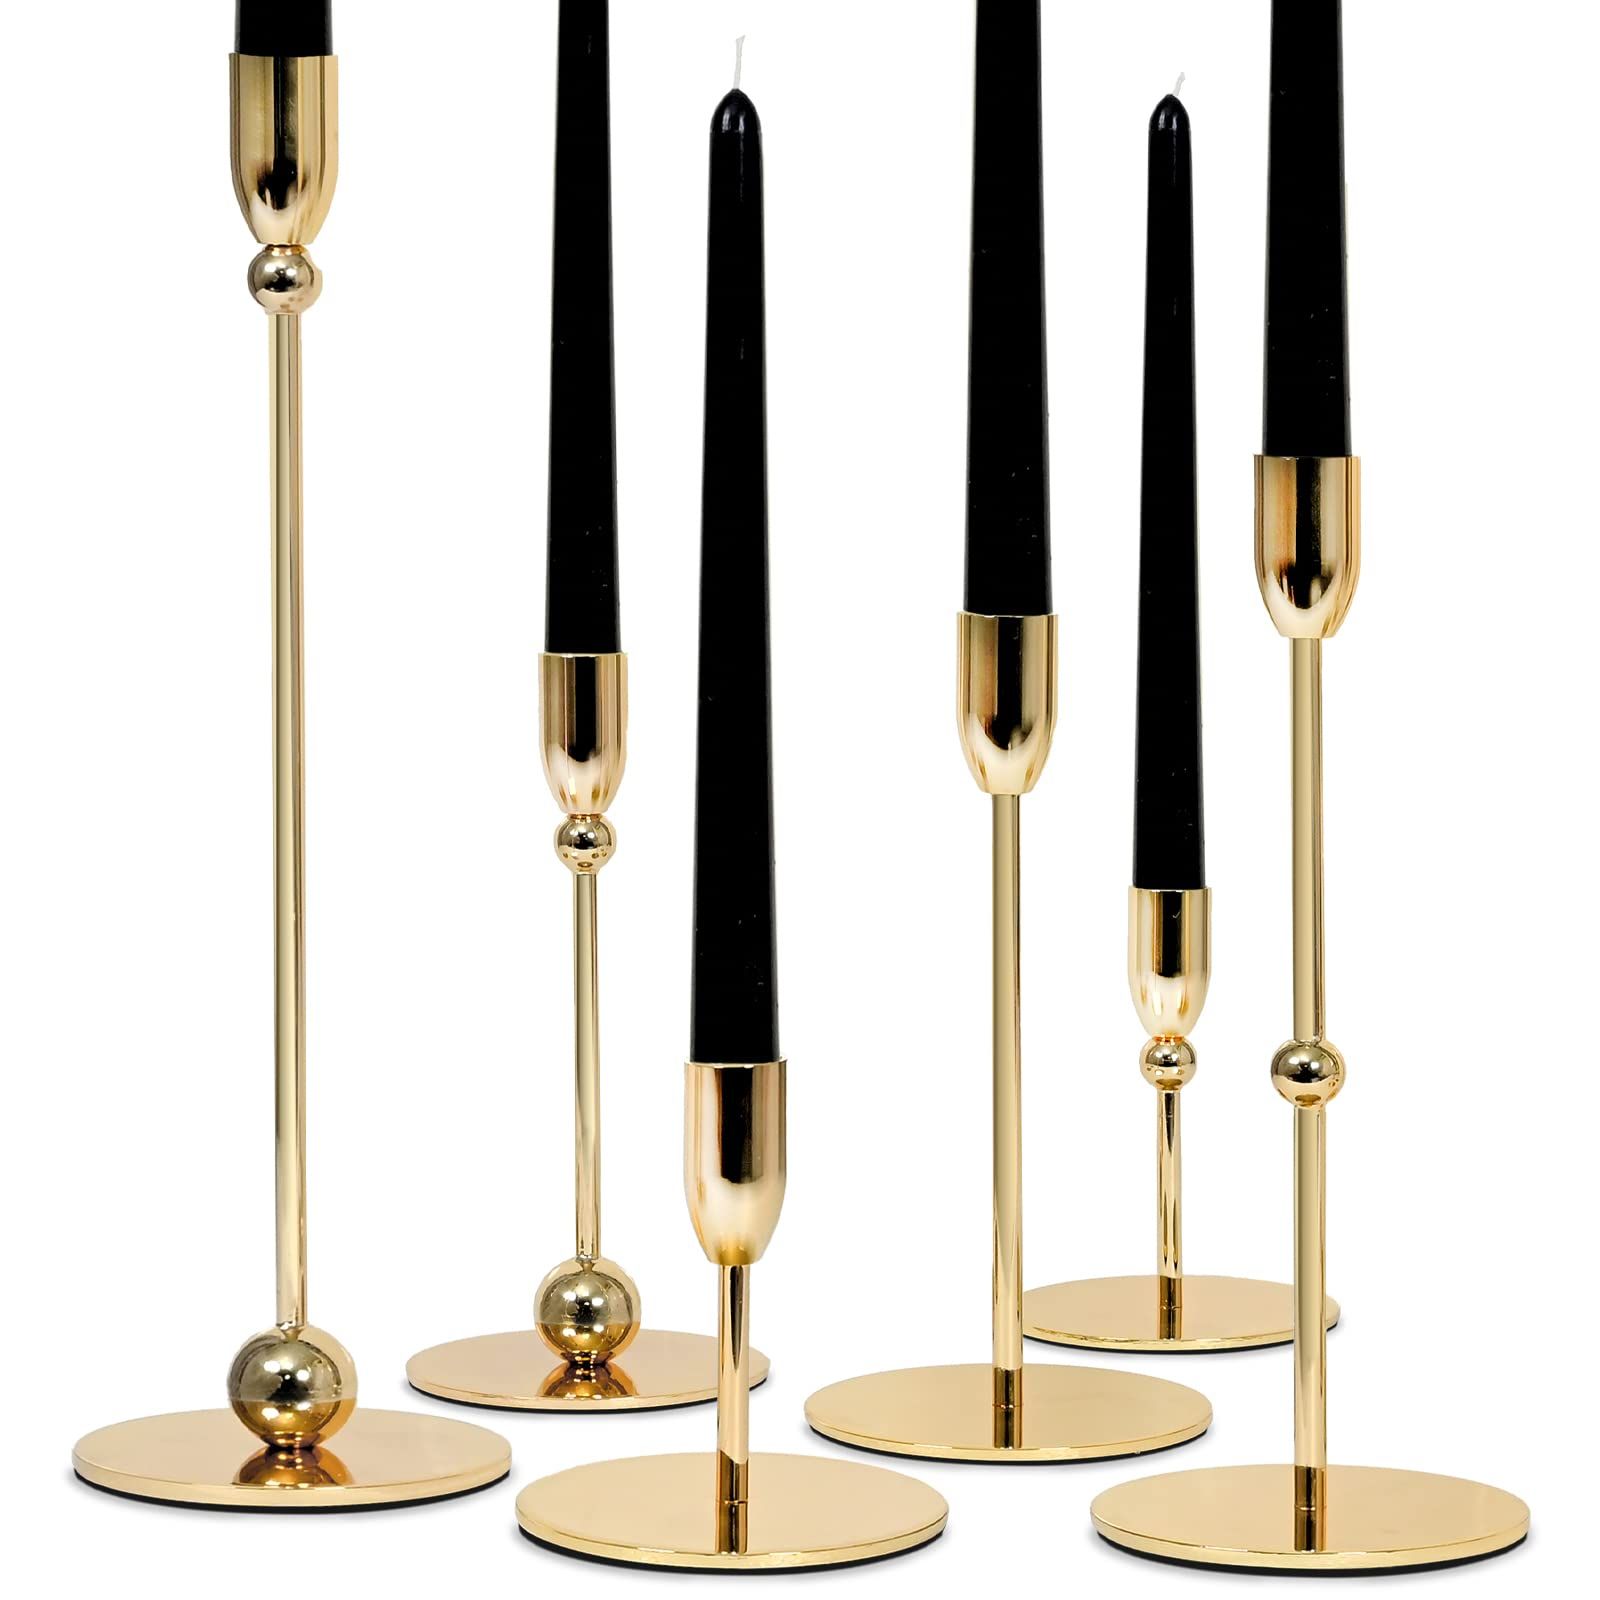 VROOMIUM Candlestick Holders - 6 Pcs Metal Gold Candle Stick Holders Set for Table Centerpiece, Stab | Amazon (US)